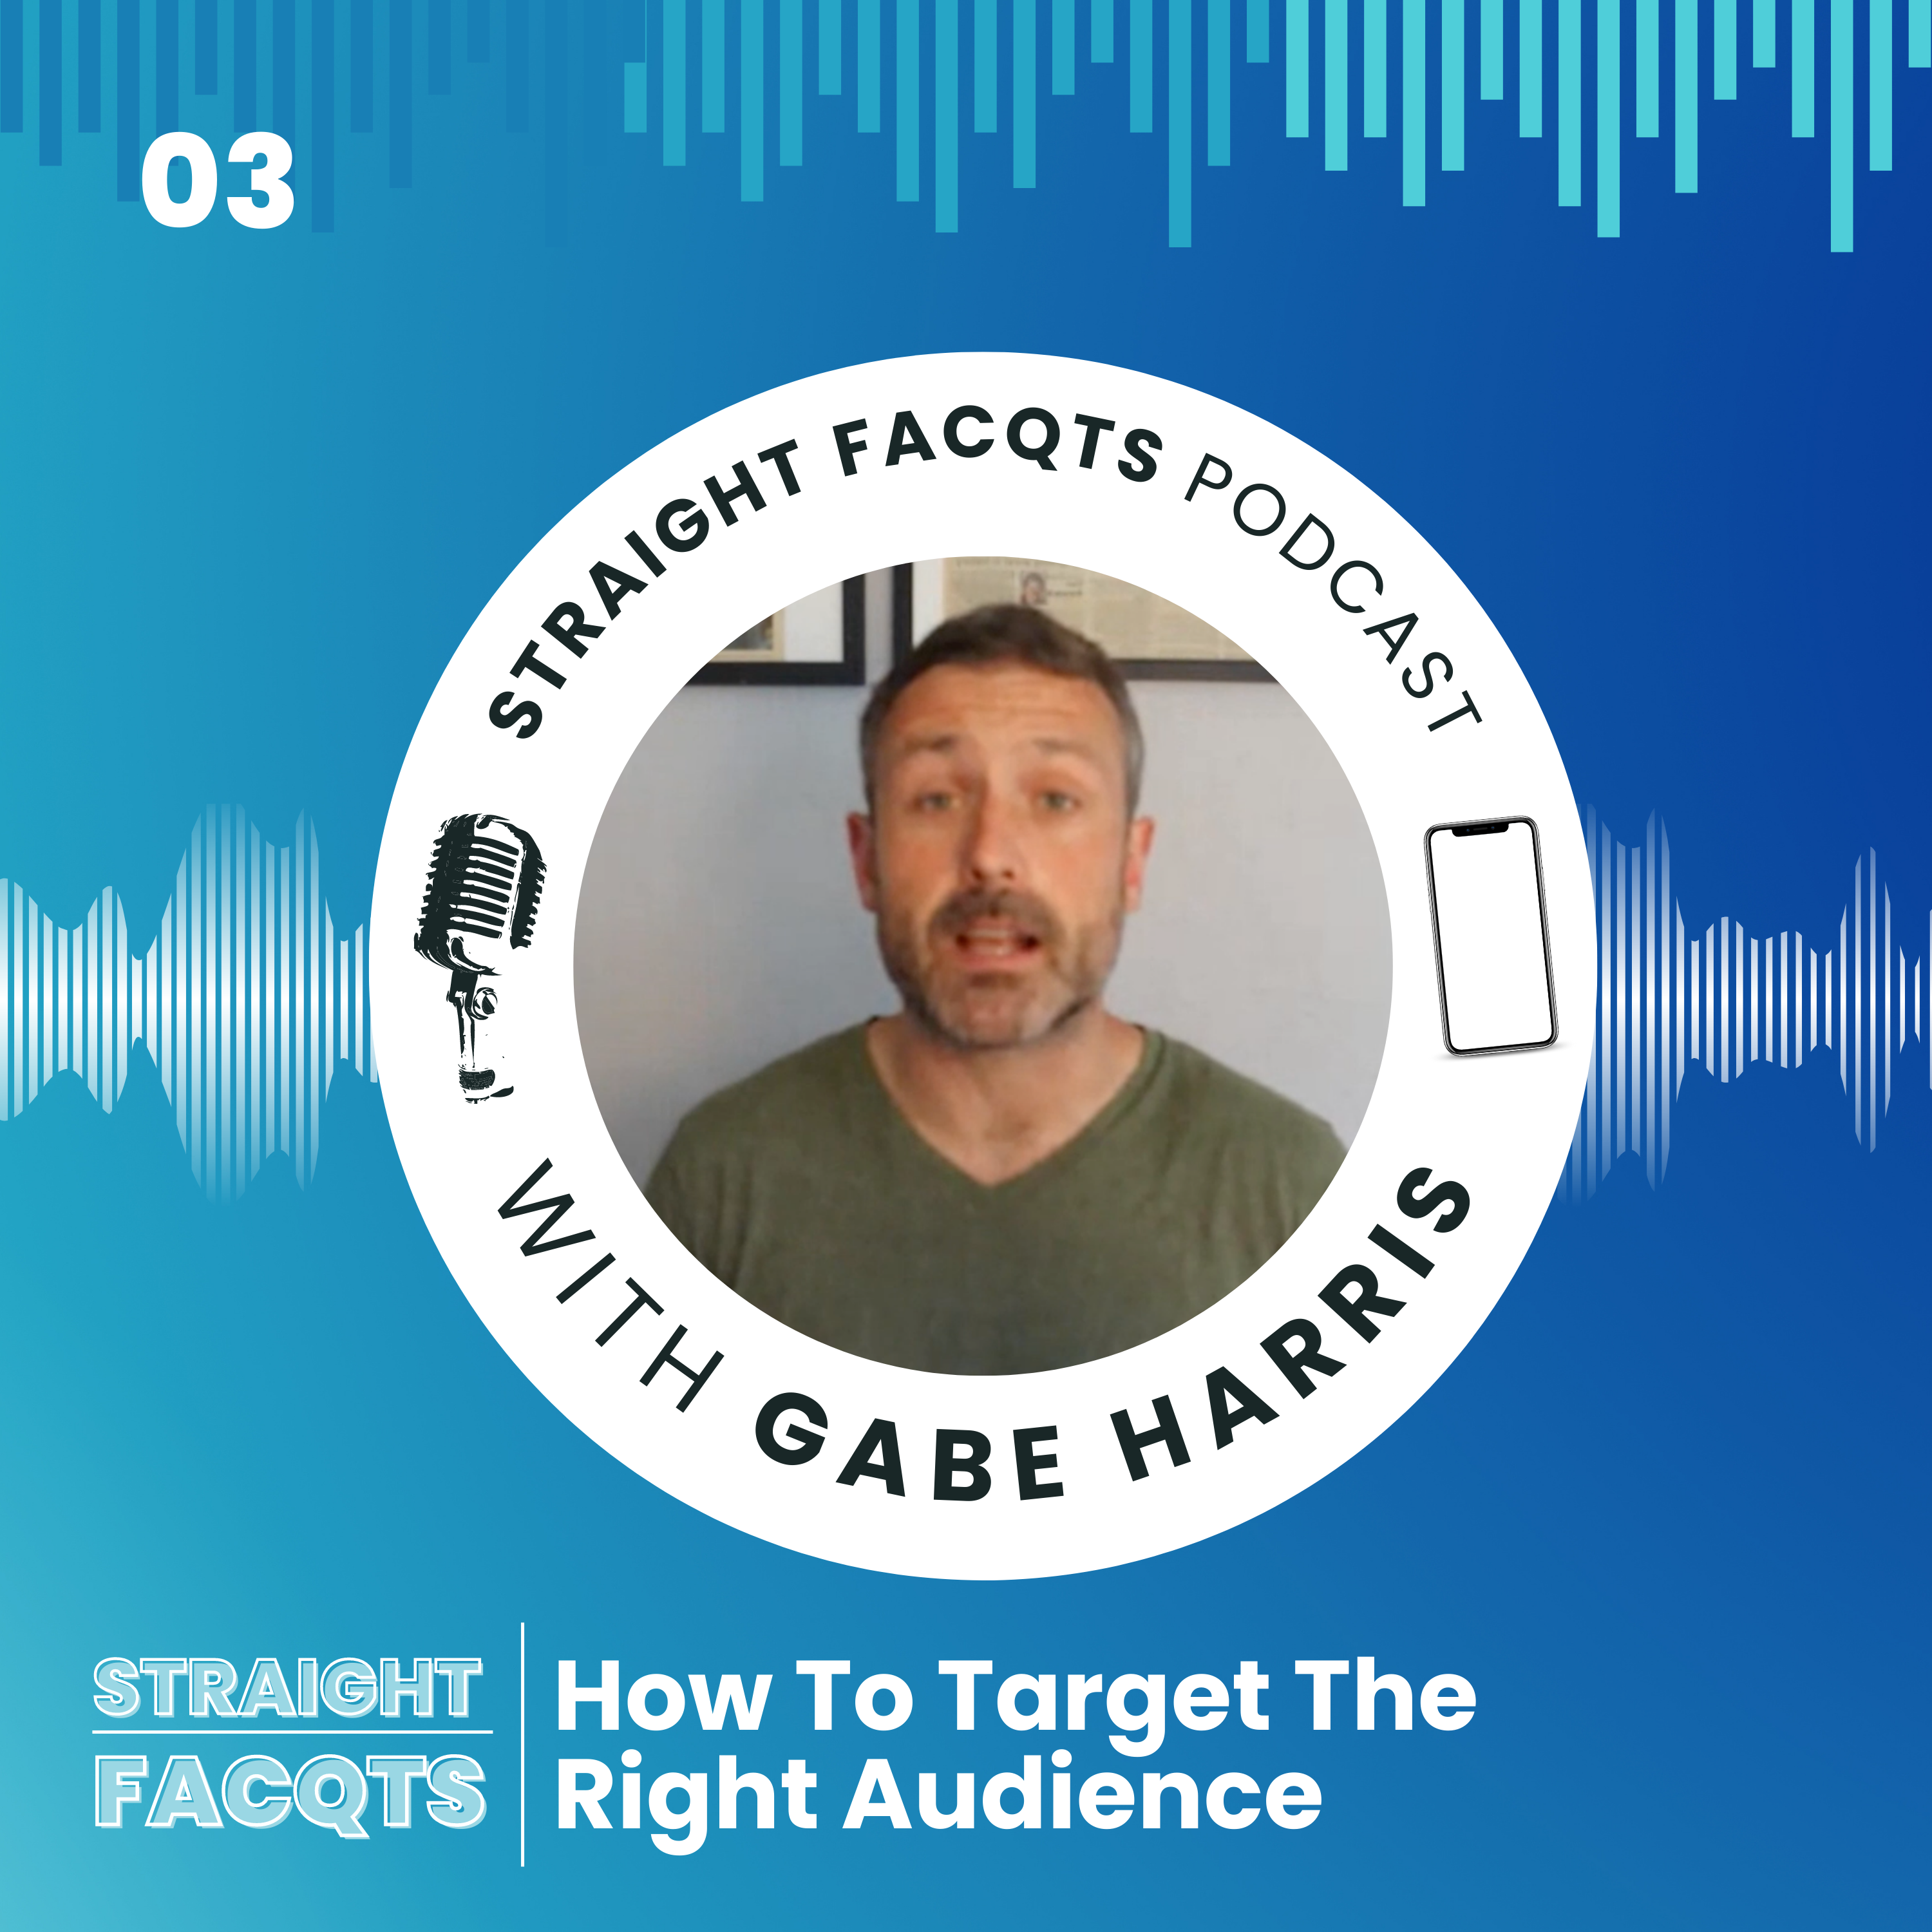 How To Target The Right Audience | Straight Facqts Podcast Ep. 3